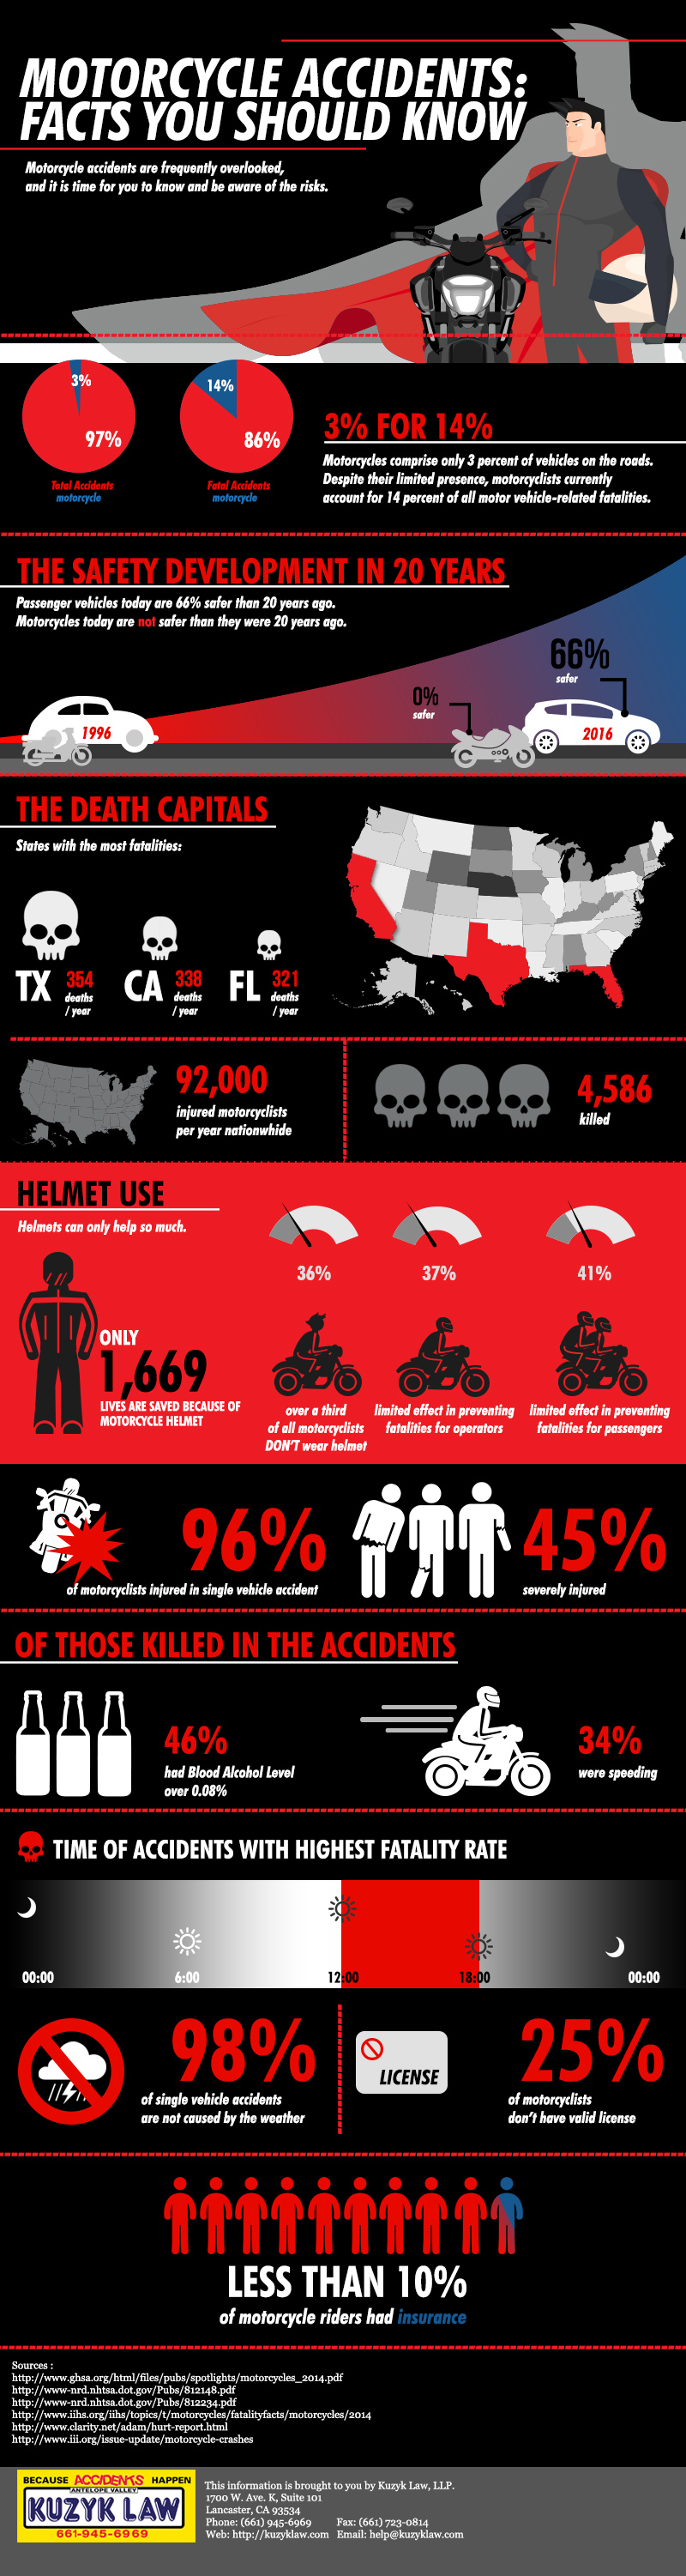 Motorcycle Accidents: Facts You Should Know